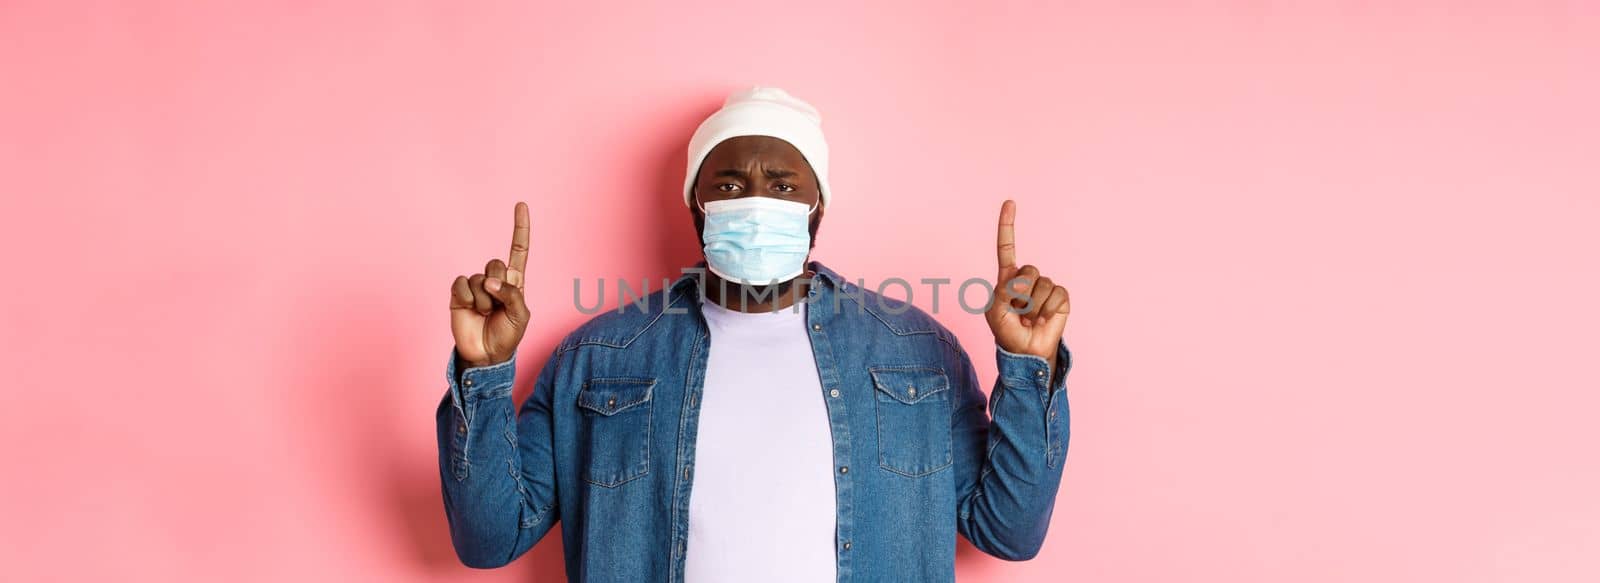 Coronavirus, lifestyle and global pandemic concept. Upset Black man in face mask frowning, pointing fingers up, showing advertisement, standing over pink background.